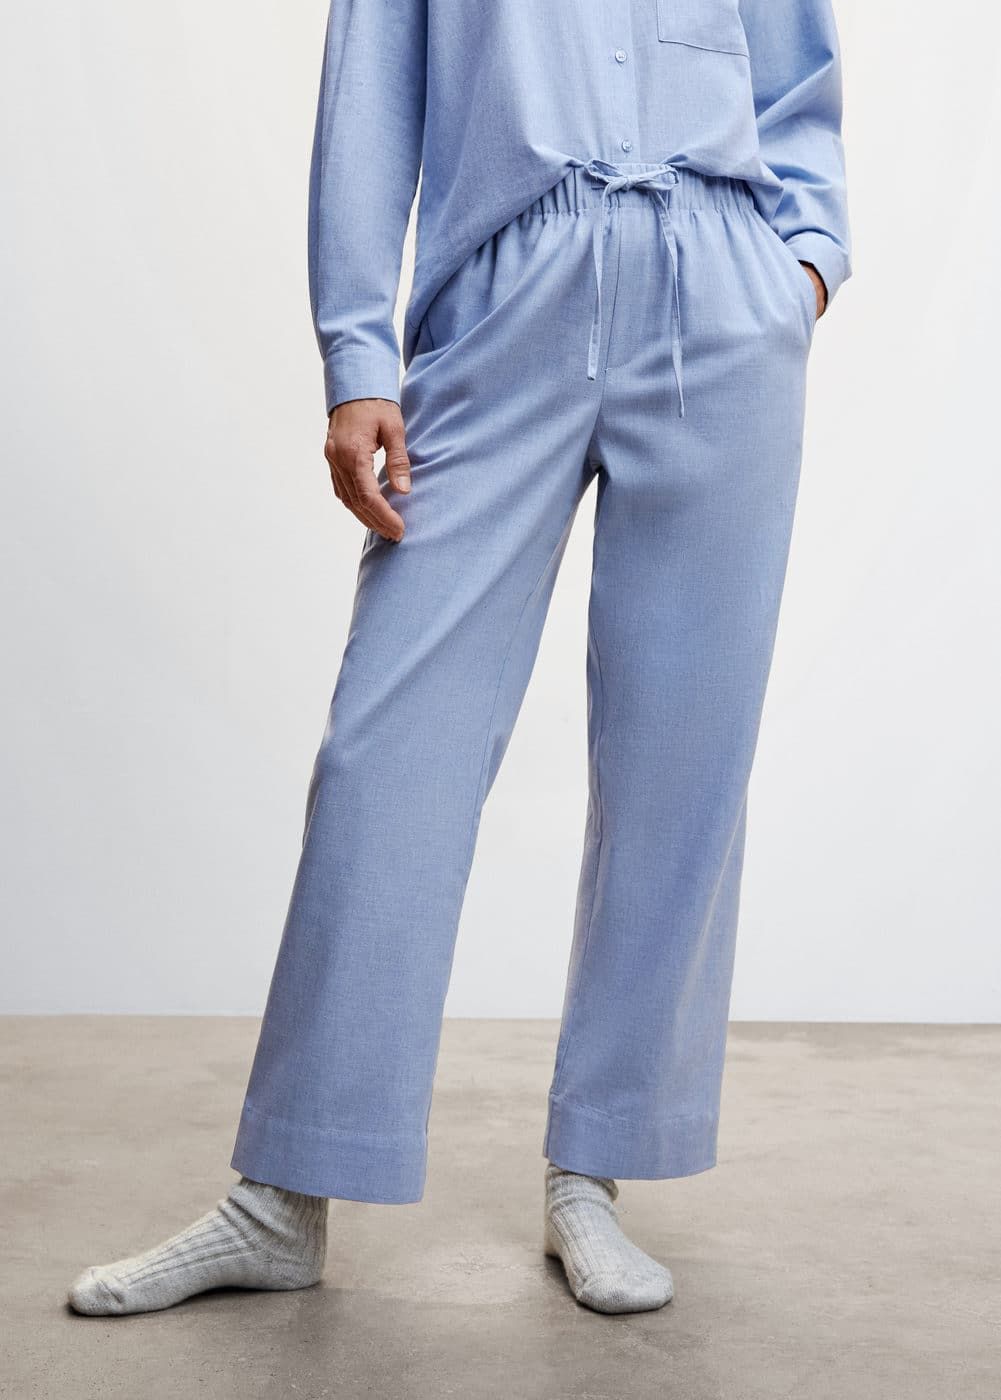 Everyone's Agreeing on This Controversial Pajama-Pant Trend | Who What Wear